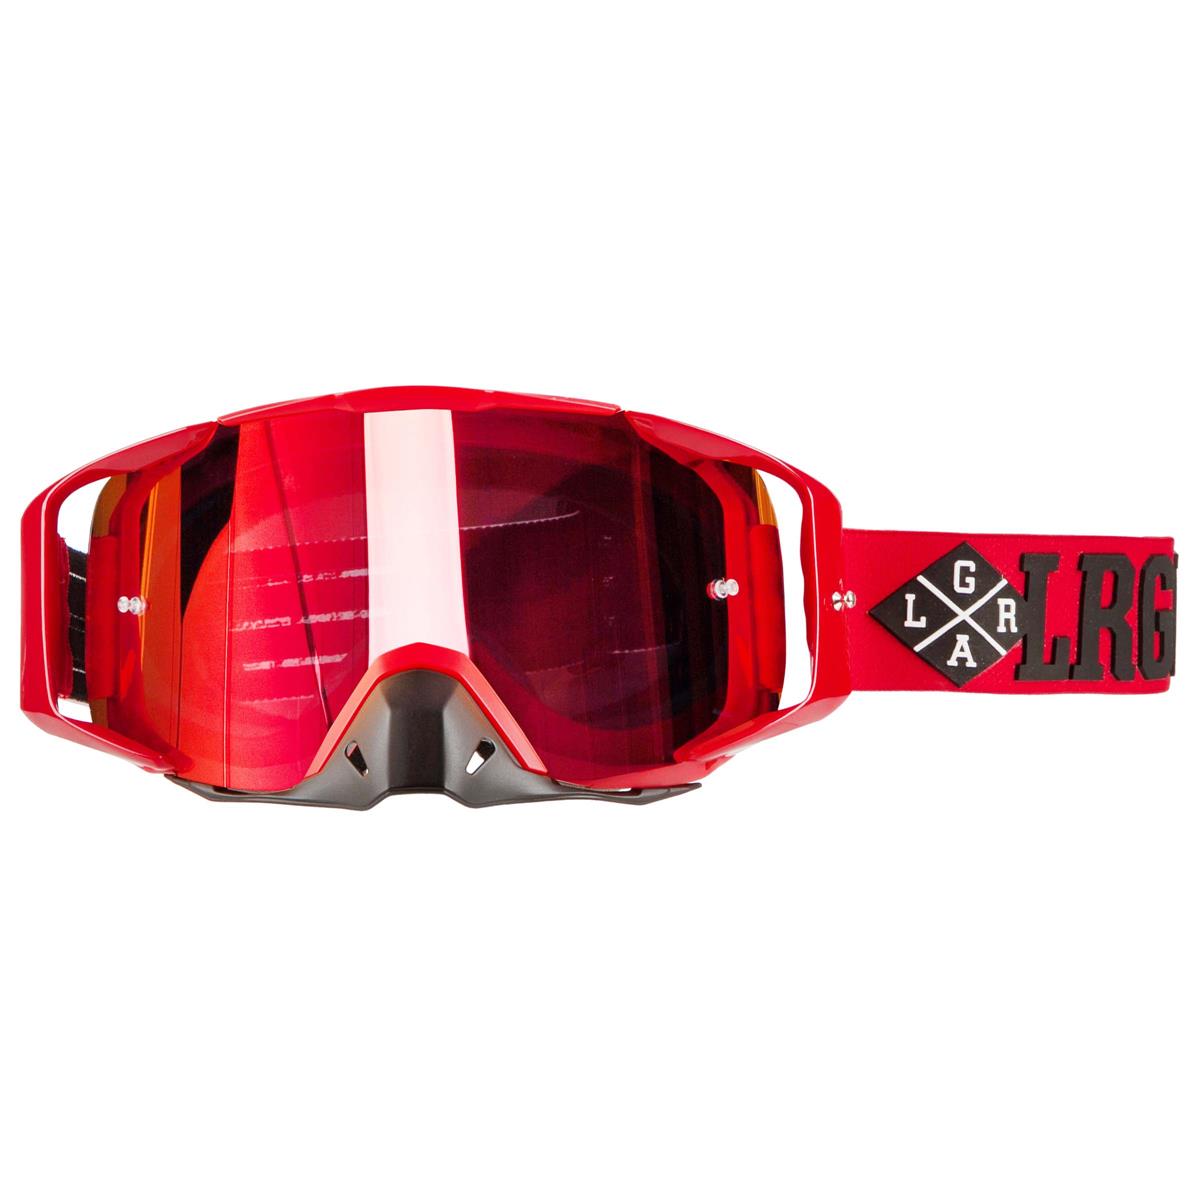 Loose Riders Crossbrille  Rot